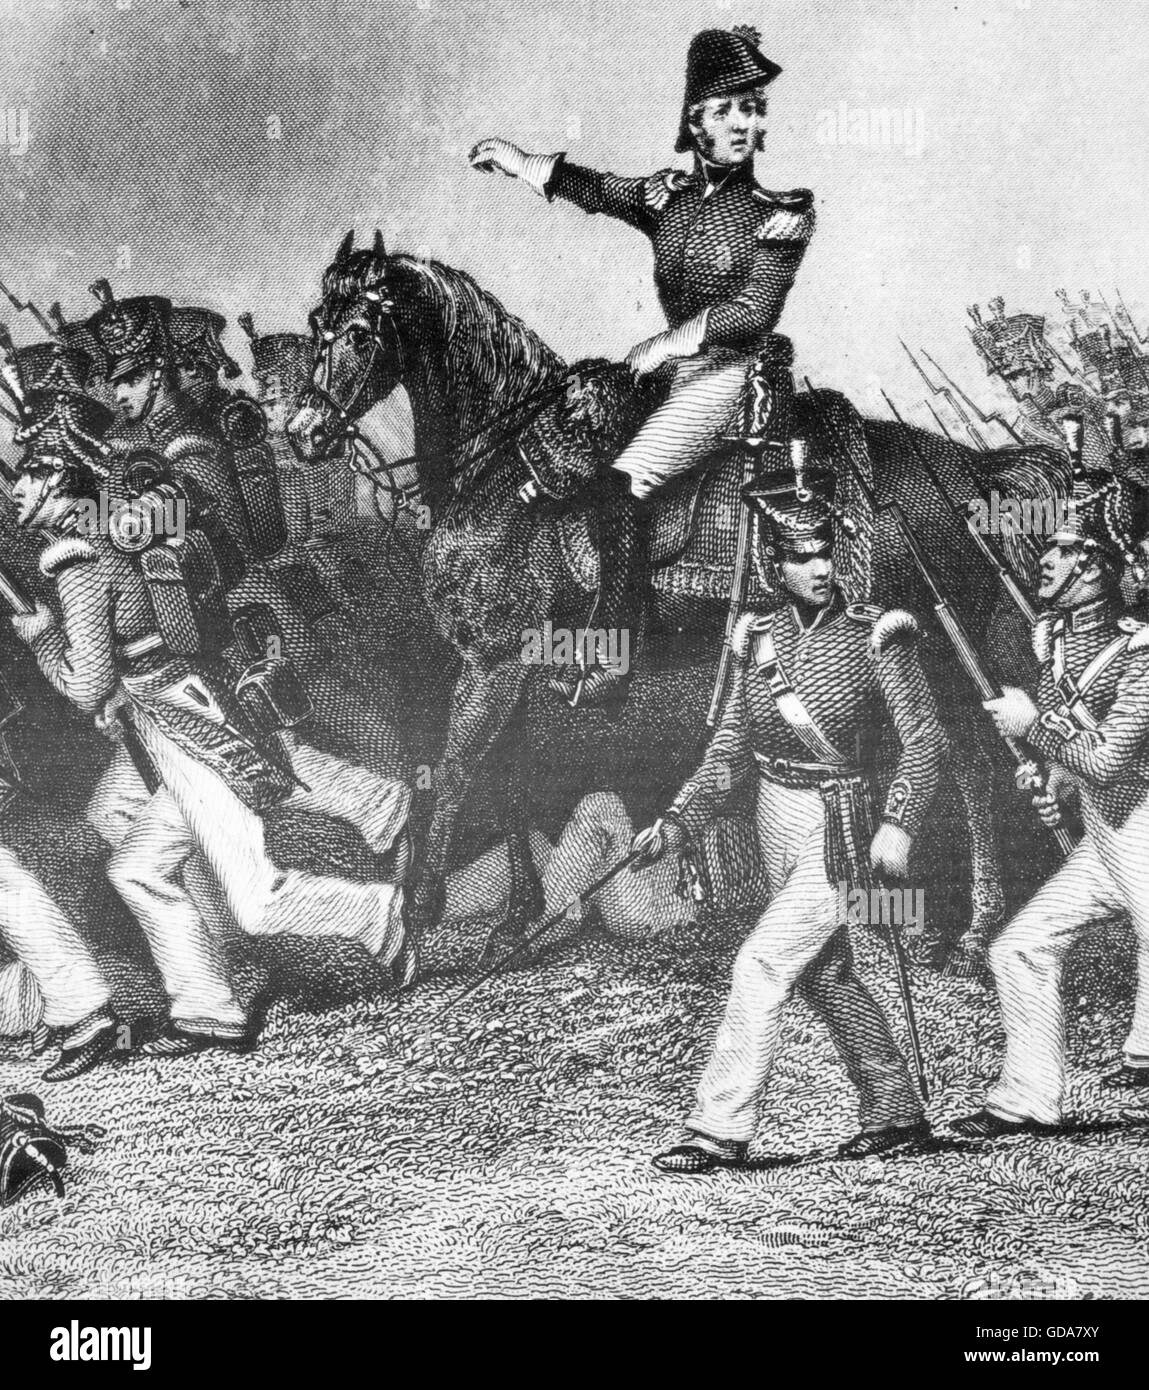 WINFIELD SCOTT (1786-1866) United States Army commander. Contemporary engraving showing hiom ordering the charge of McNeil's battalion during the Battle of Chippawa 5 July 1814 Stock Photo